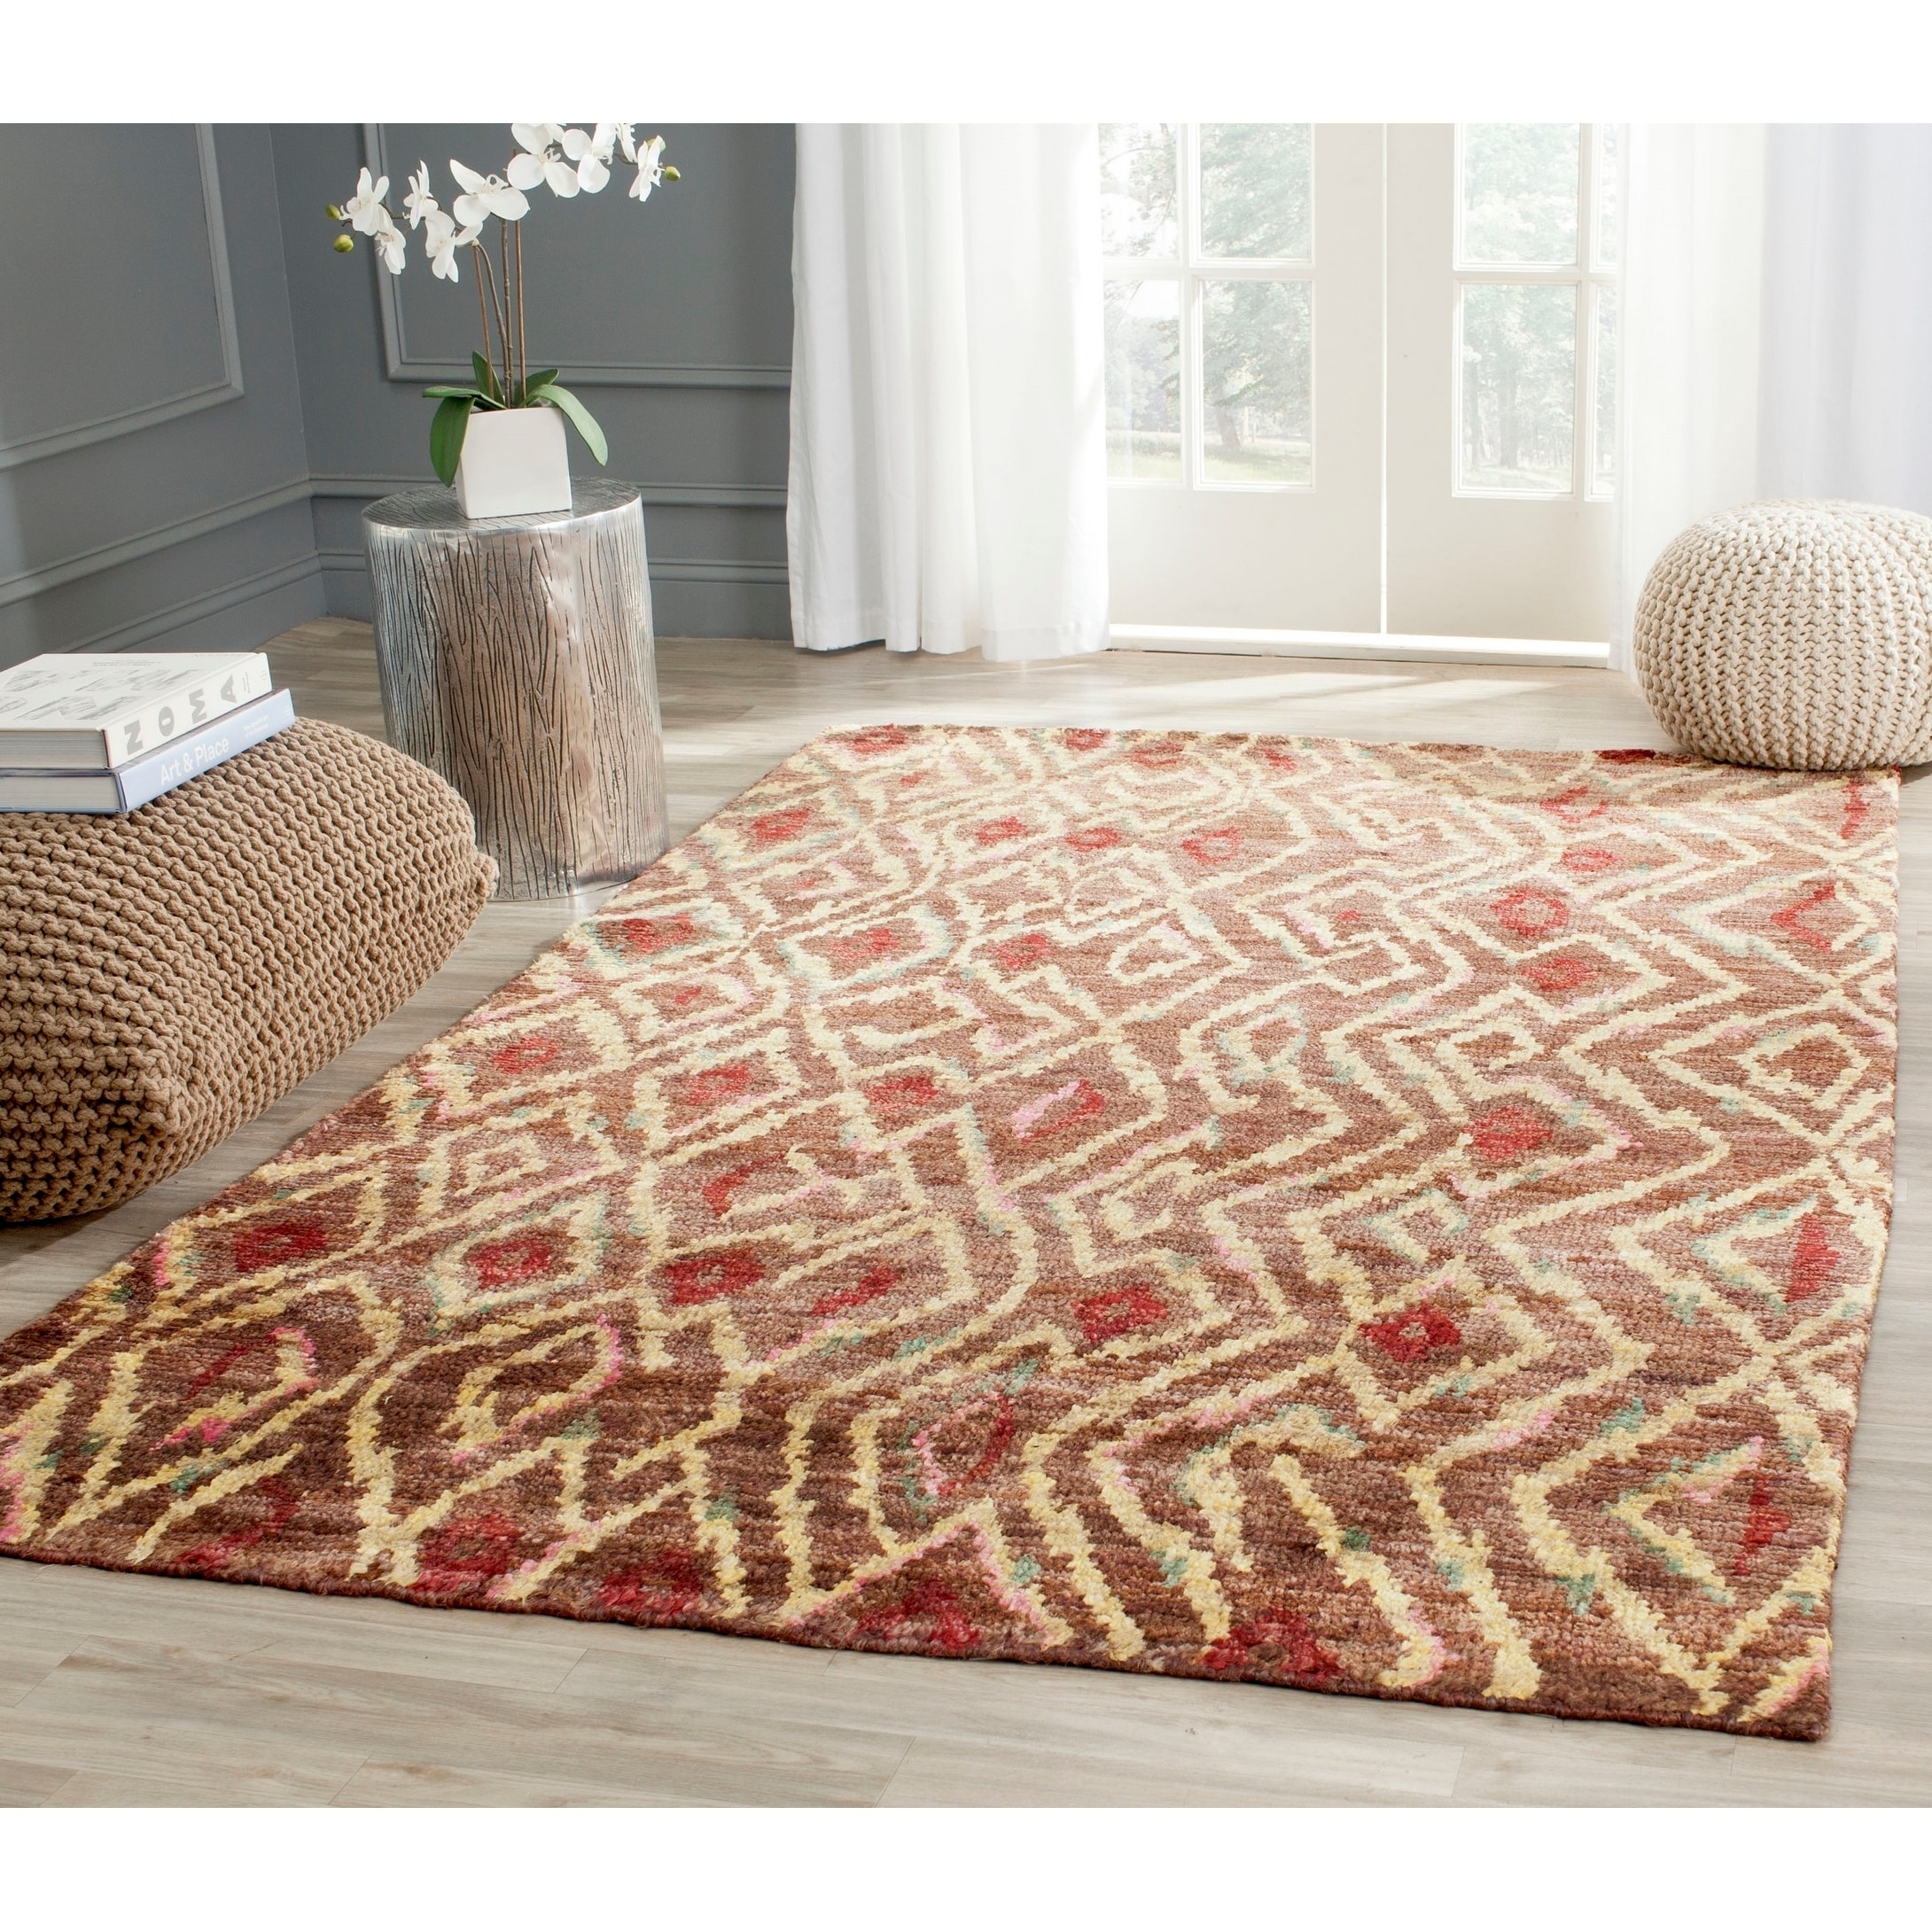 Safavieh Hand knotted Bohemian Brown/ Gold Jute Rug (4 X 6)